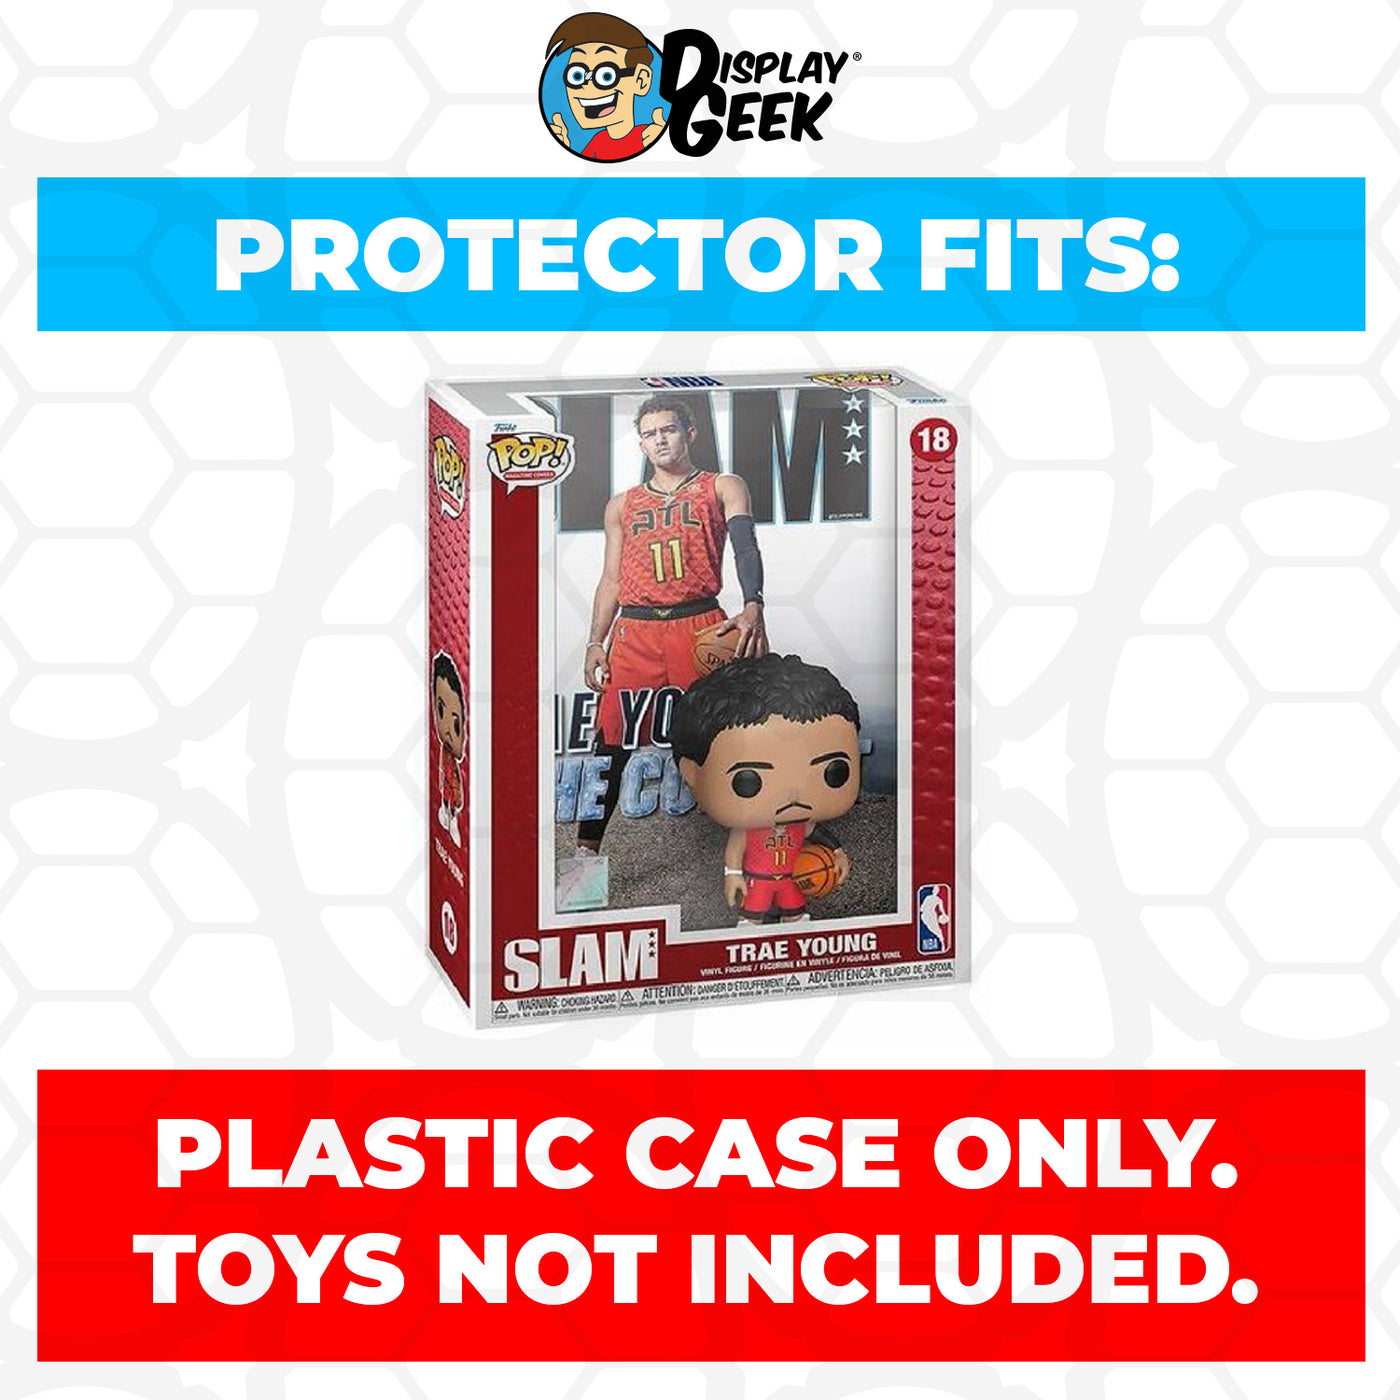 Pop Protector for Trae Young #18 Funko Pop Magazine Covers on The Protector Guide App by Display Geek